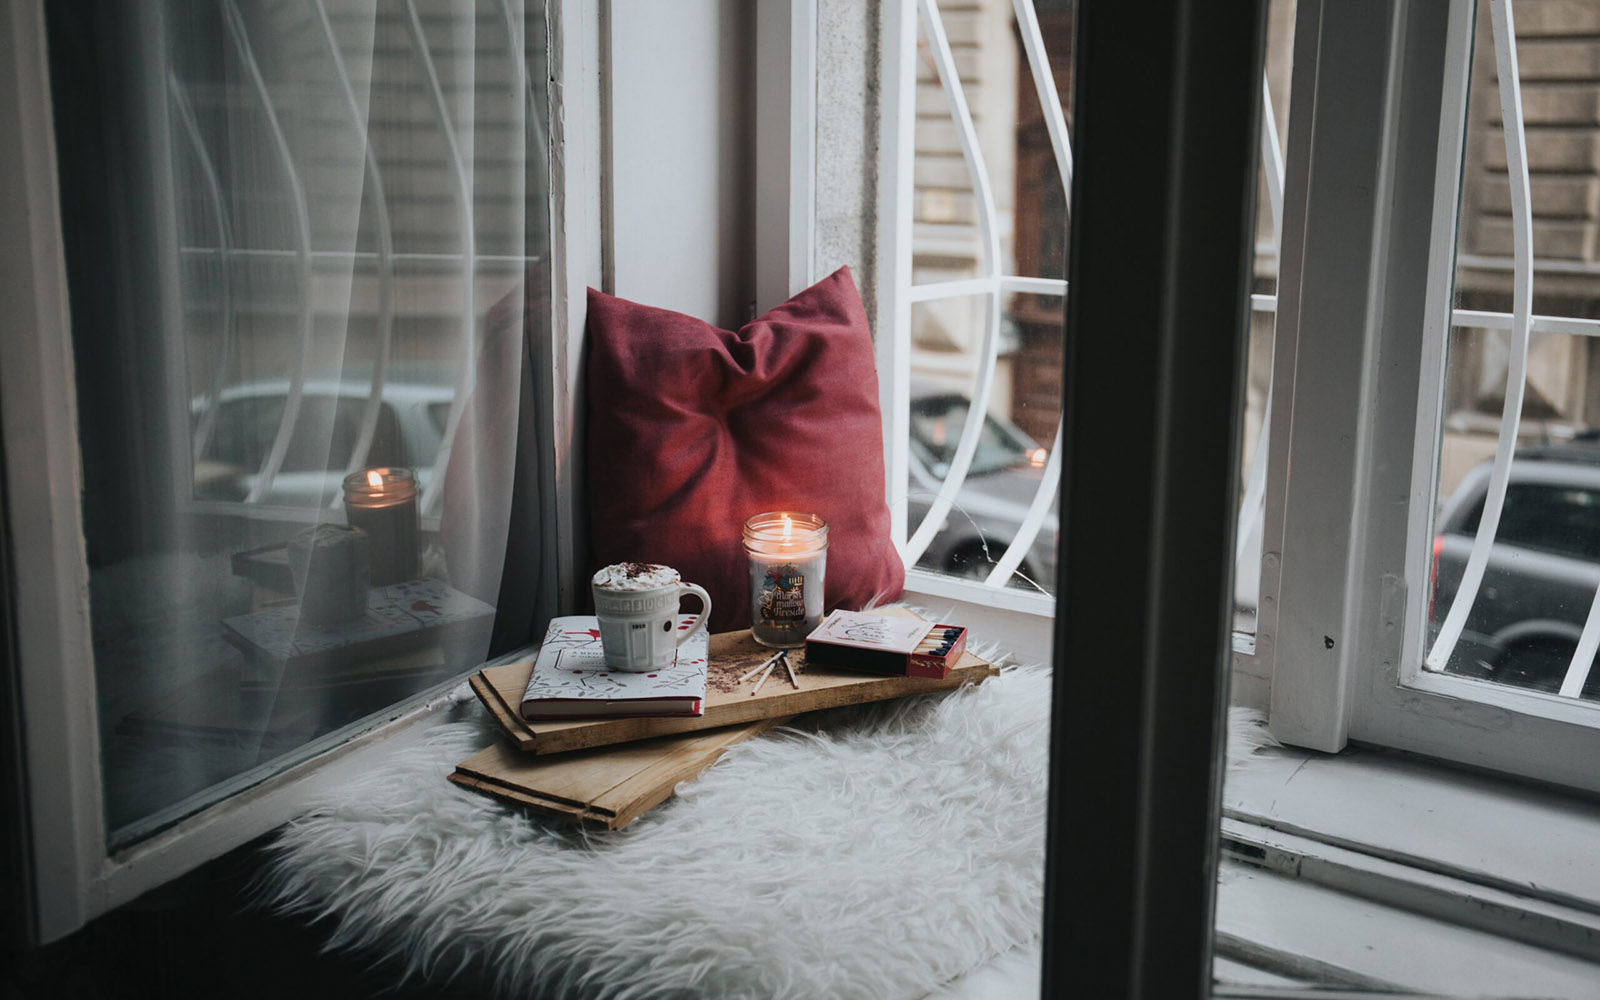 Cozy window nook with candle, books, and hot drink.